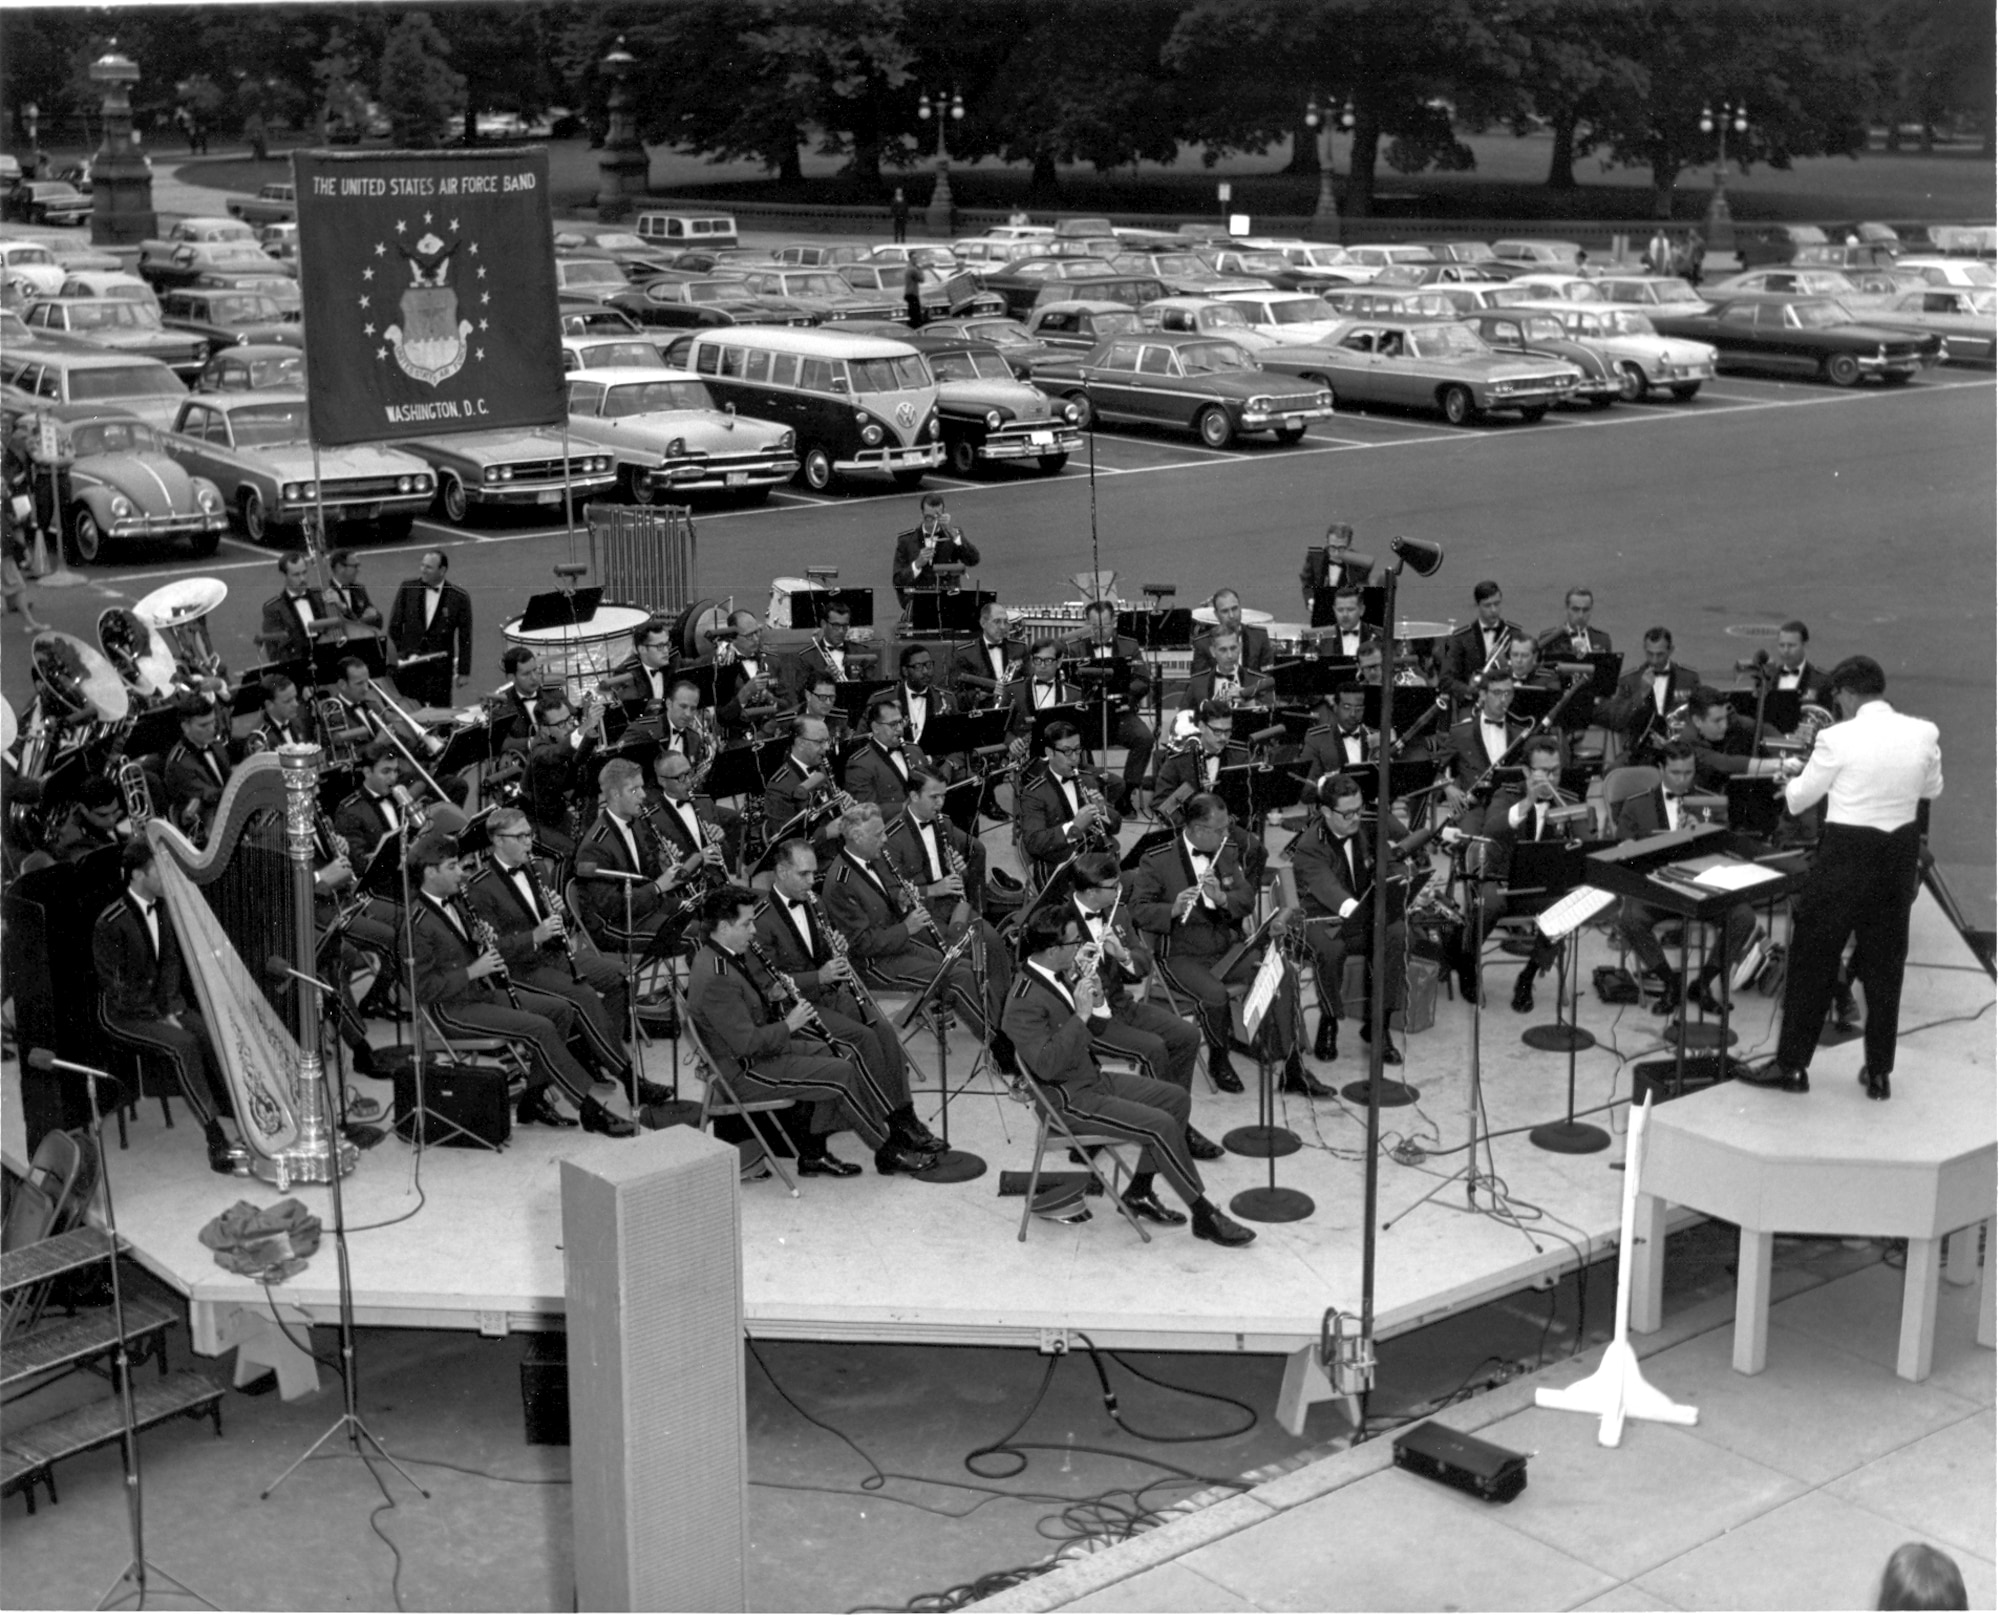 First photo:  The United States Air Forces plays an outdoor summer concert on the East side of the Capitol Building in 1968 or 1969. The conductor is Captain Albert A. Bader, the assistant conductor to Lieutenant Colonel Arnald D. Gabriel, The Air Force Band's commander and conductor.   (Official photo of The Air Force Band.)